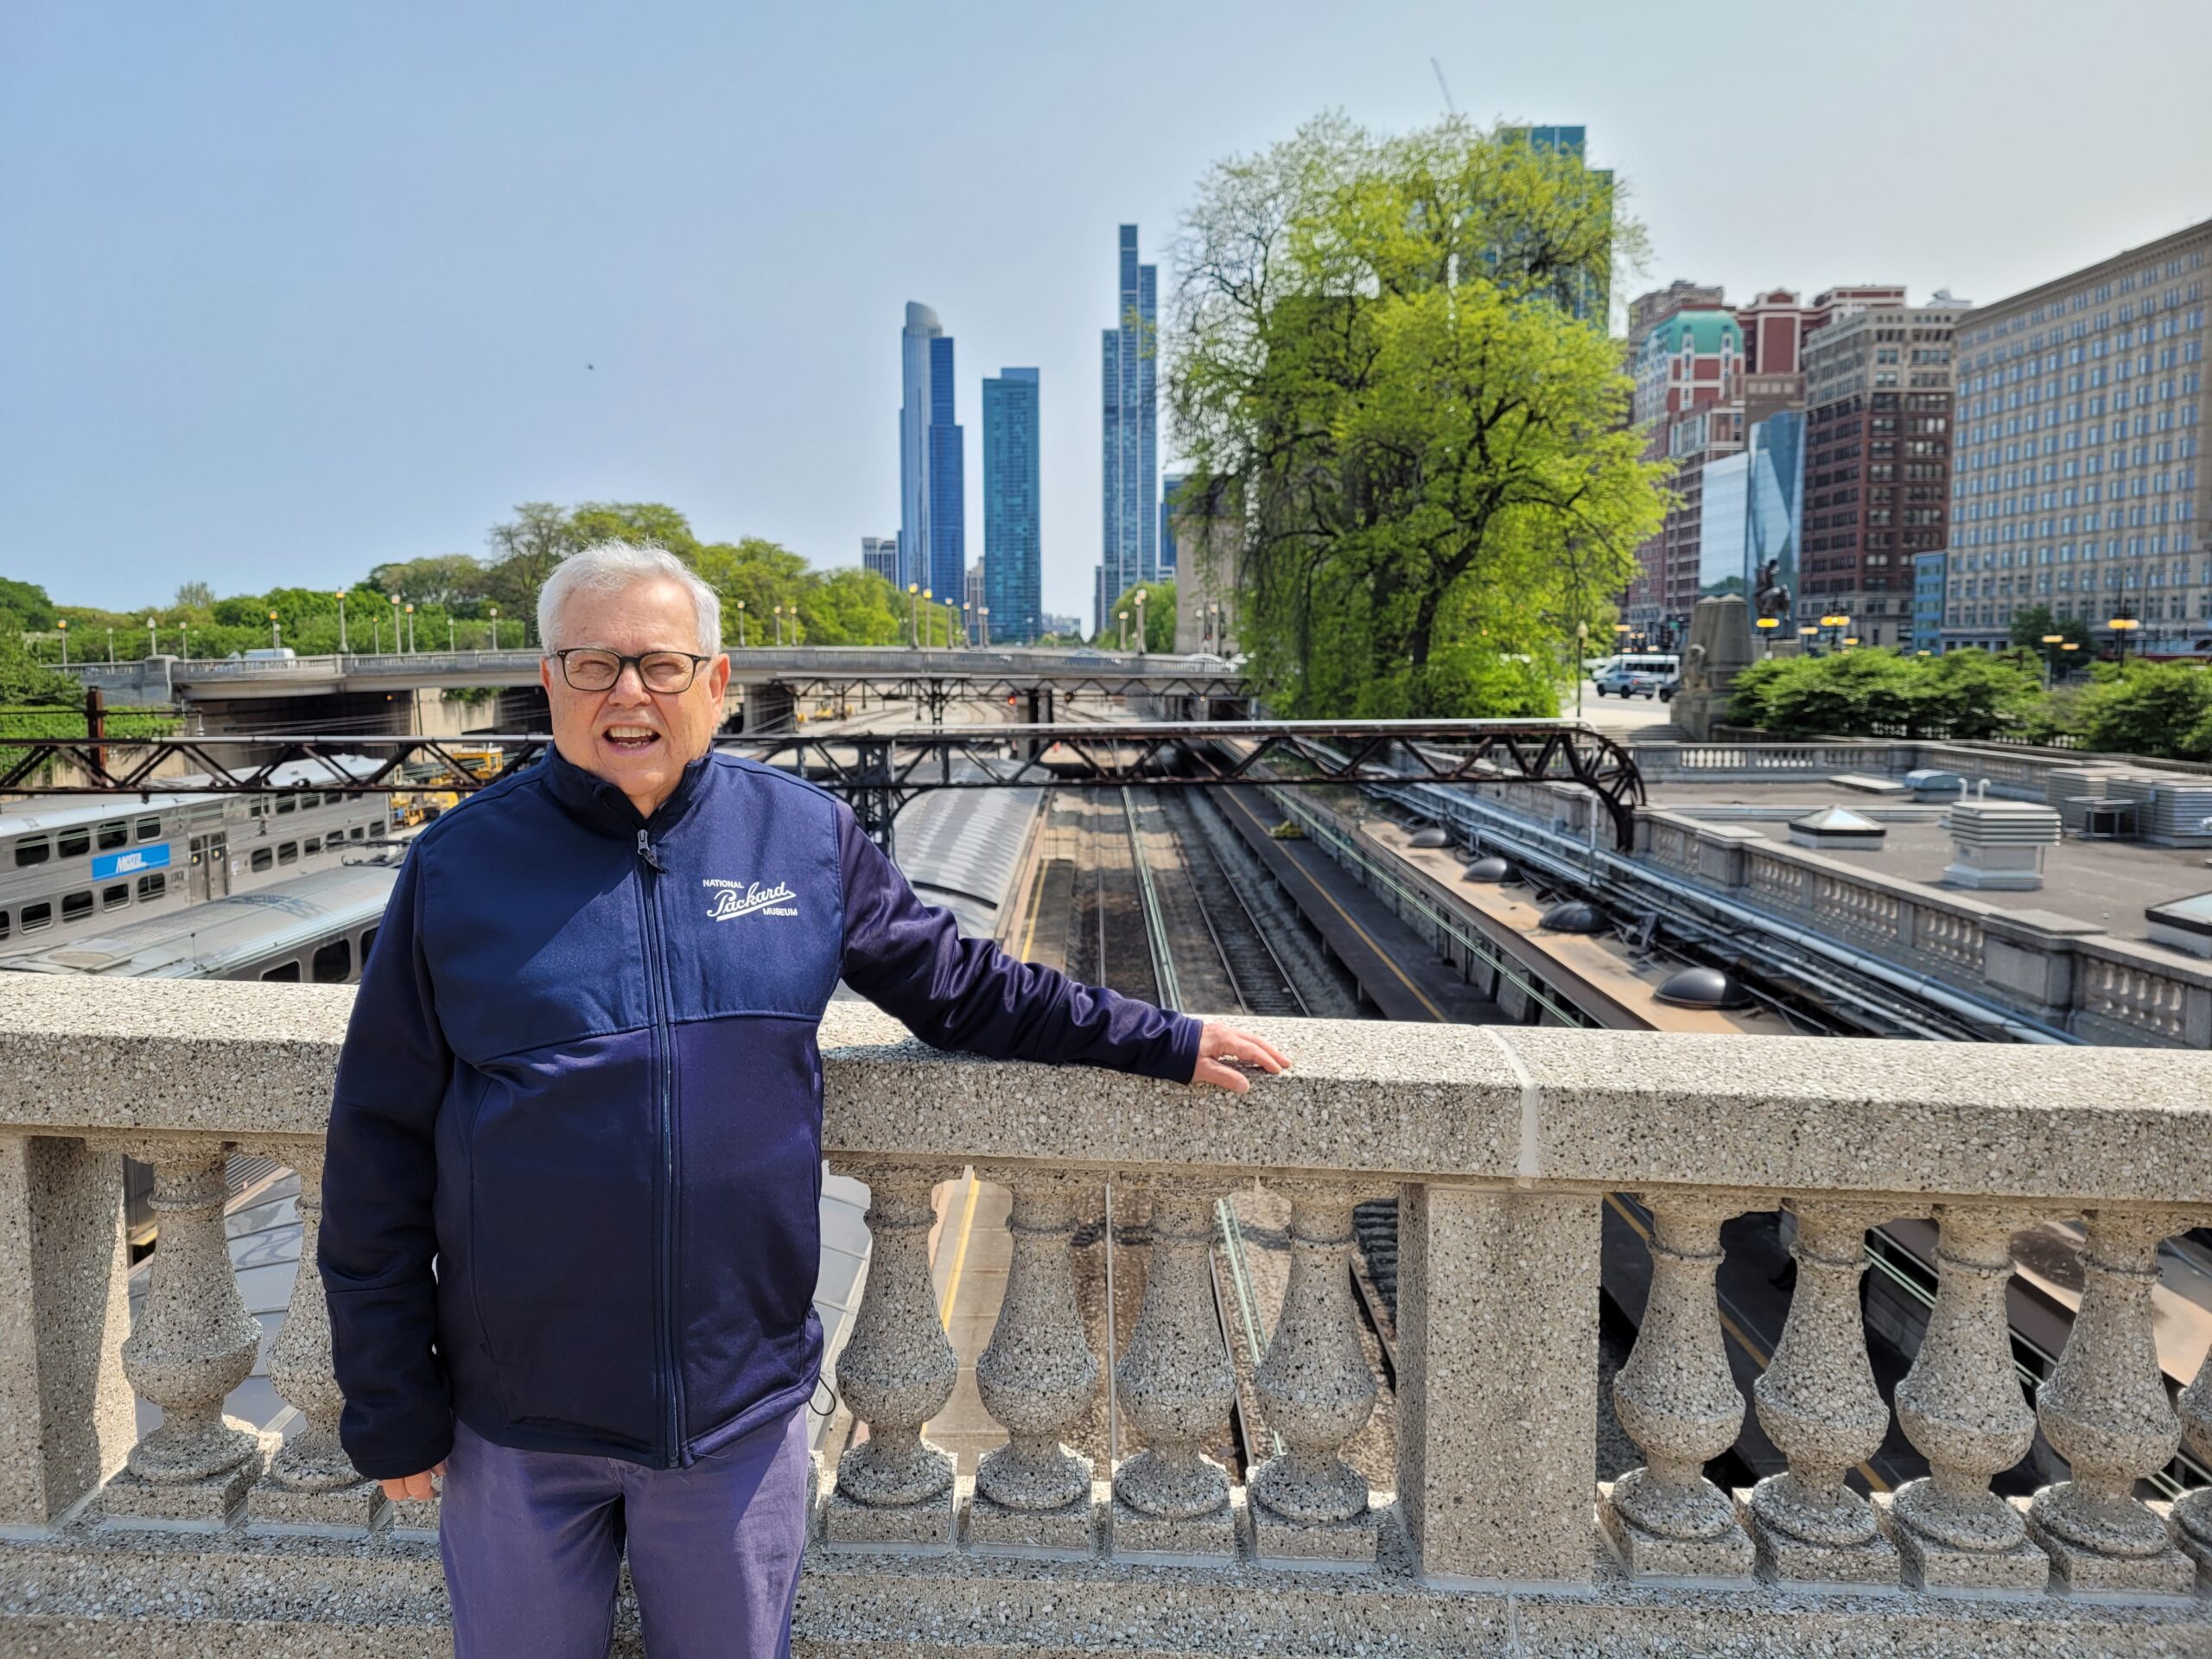 A smiling man wearing glasses and a blue sweatshirt stands on a bridge overlooking train tracks. Skyscrapers and trees are in the distance